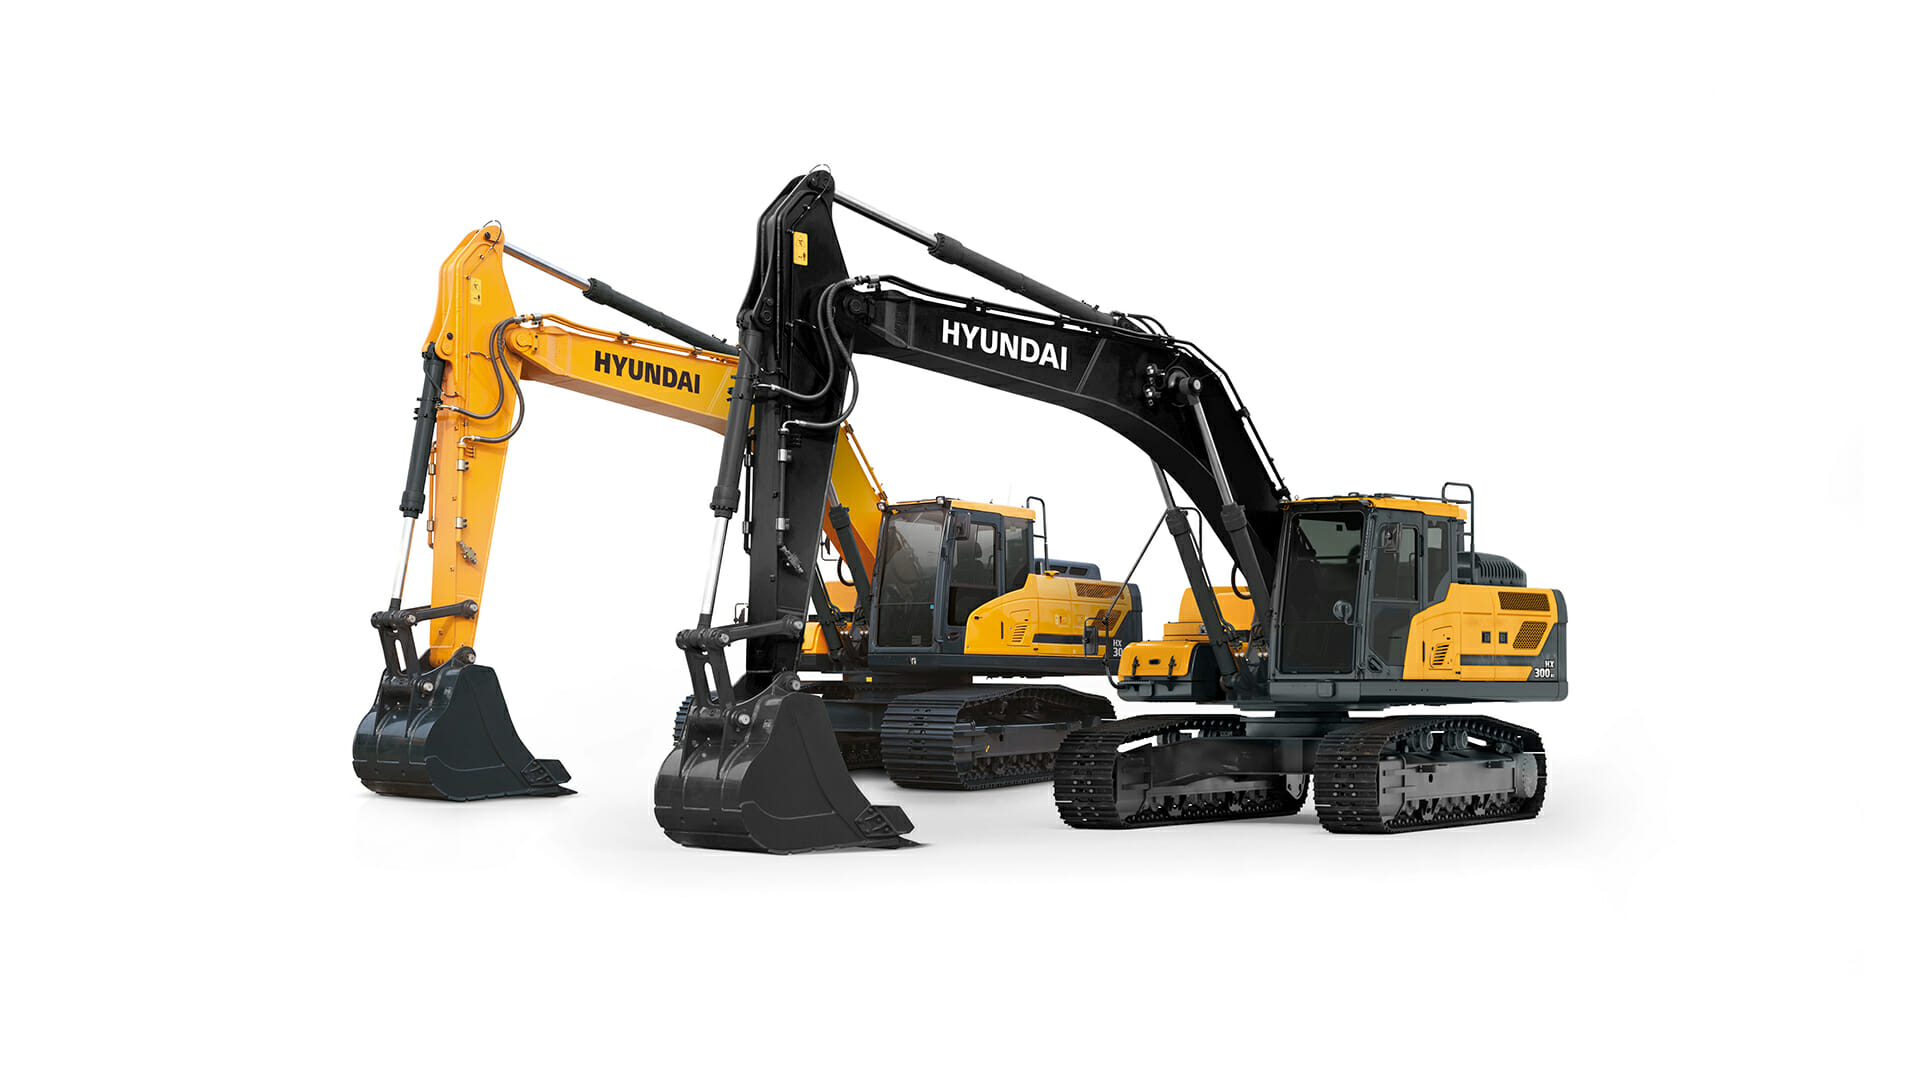 Hyundai Construction Equipment Europe (HCEE) reveals all-new look for A-series machines during annual dealer conference    @HyundaiCEE